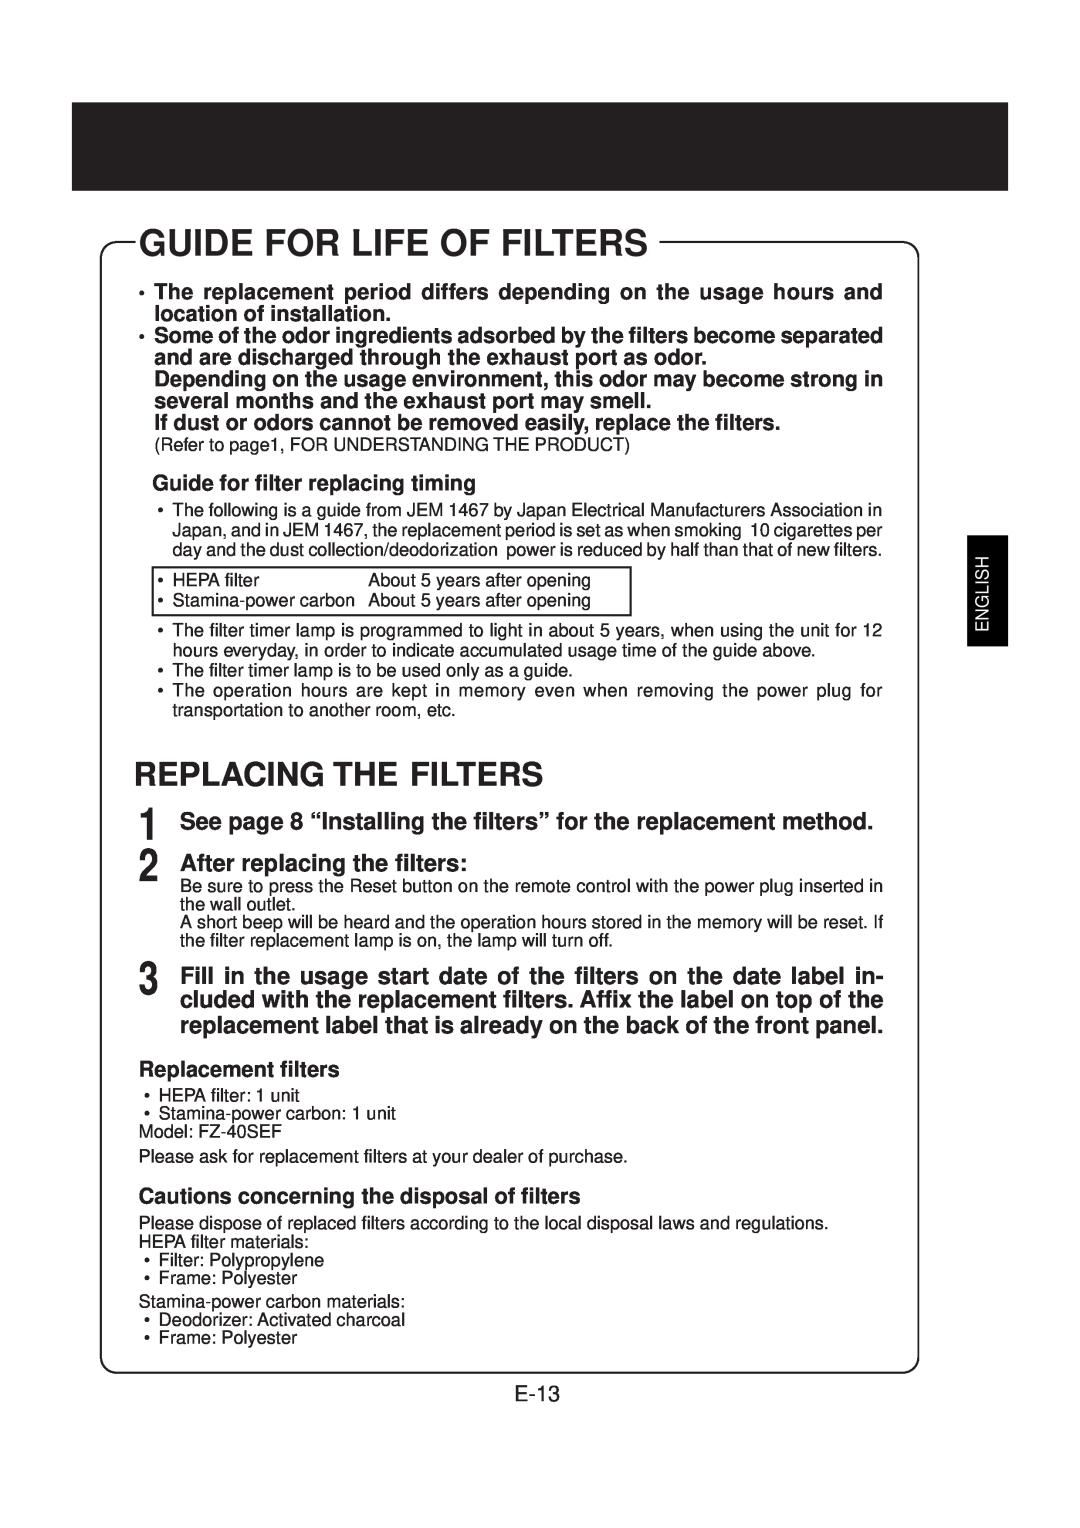 Sharp FU-40SE operation manual Guide For Life Of Filters, Replacing The Filters 